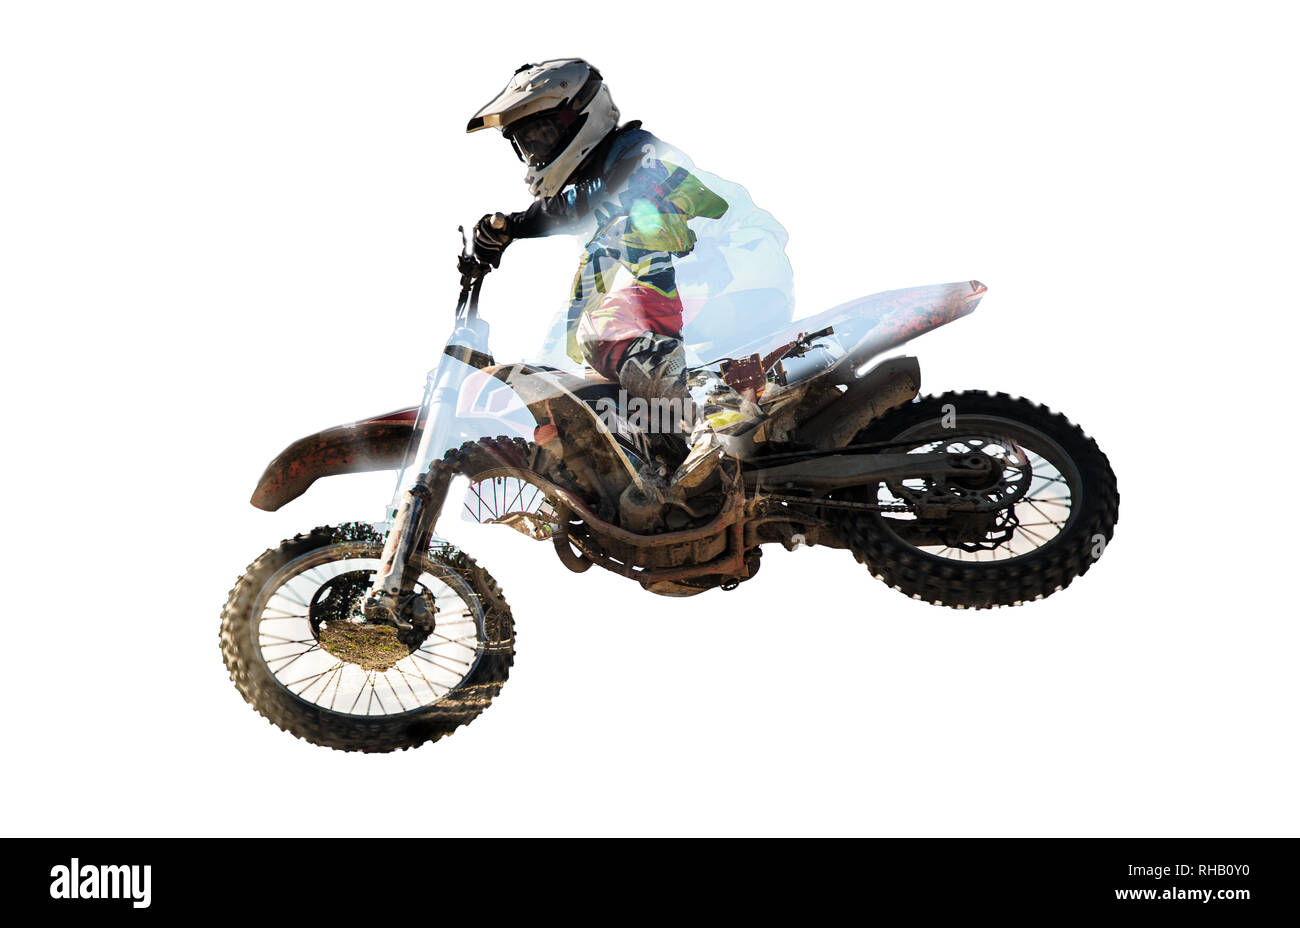 Racer on motorcycle participates in motocross cross-country in flight, jumps and takes off on springboard against sky. Concept active extreme rest. Stock Photo